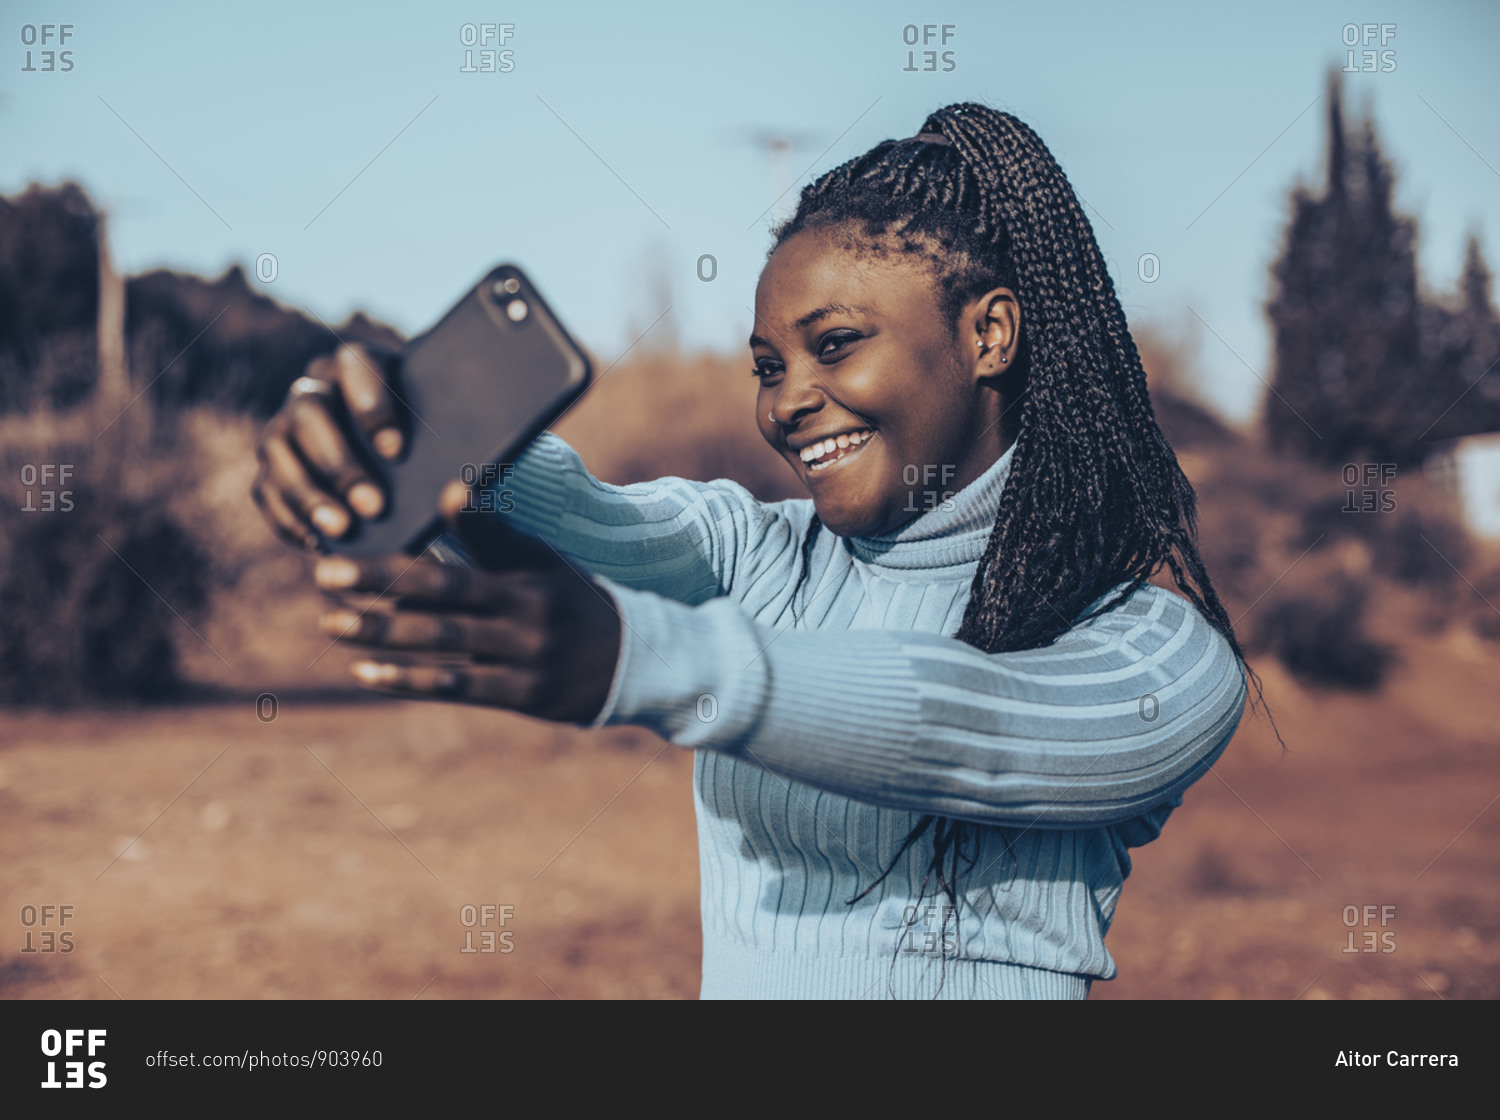 Beautiful young woman with braids smiling and taking selfies in a rural setting